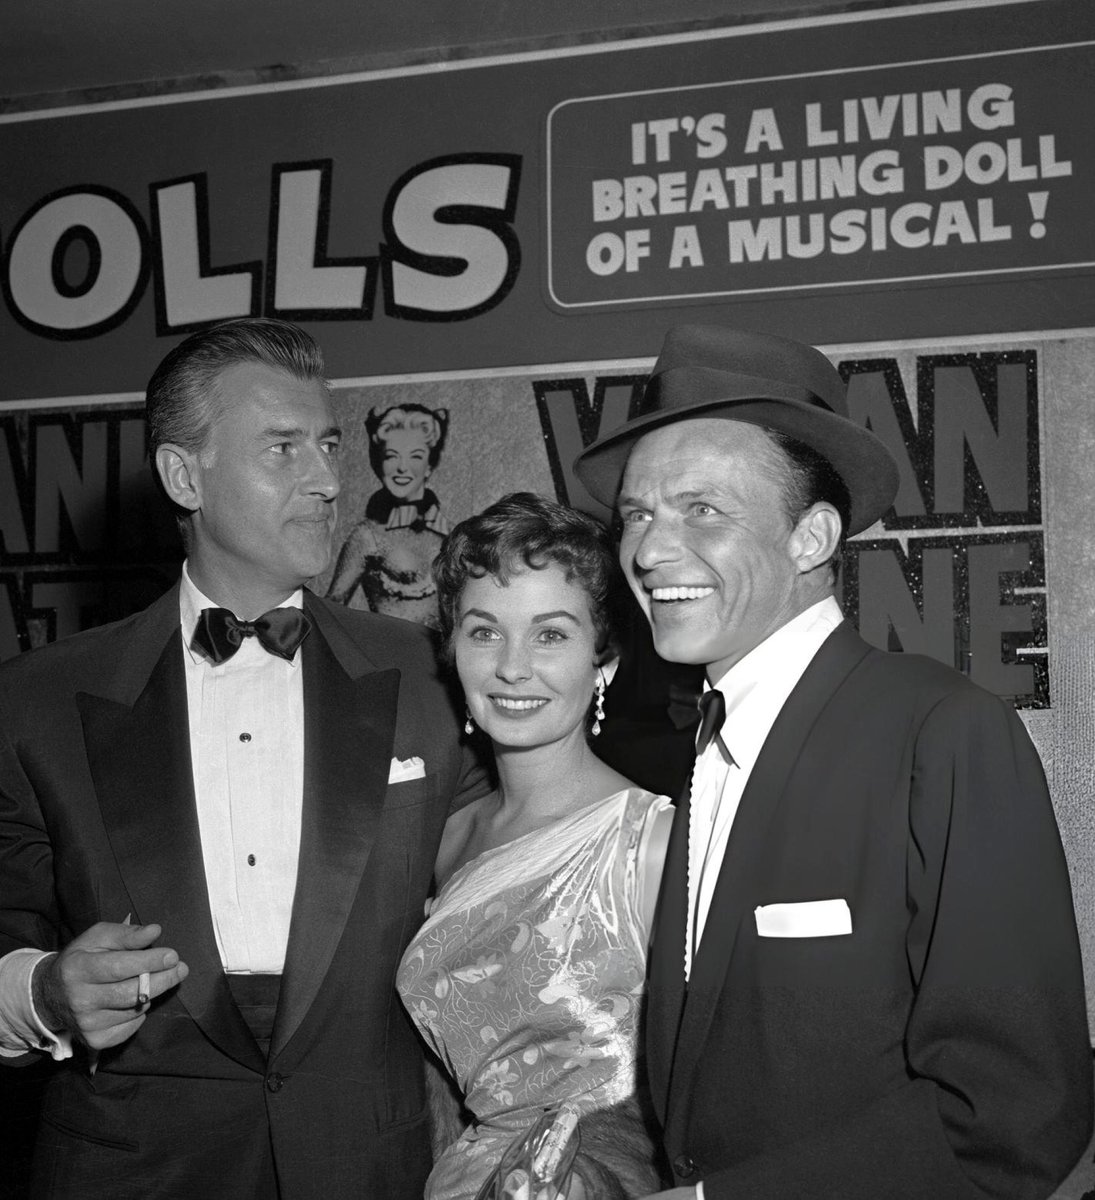 Jean Simmons, Frank Sinatra, and Simmons' husband Stewart Granger at the premiere of Guys and Dolls at the Capitol Theatre in New York City on November 3, 1955. Photo © Bettmann Collection.